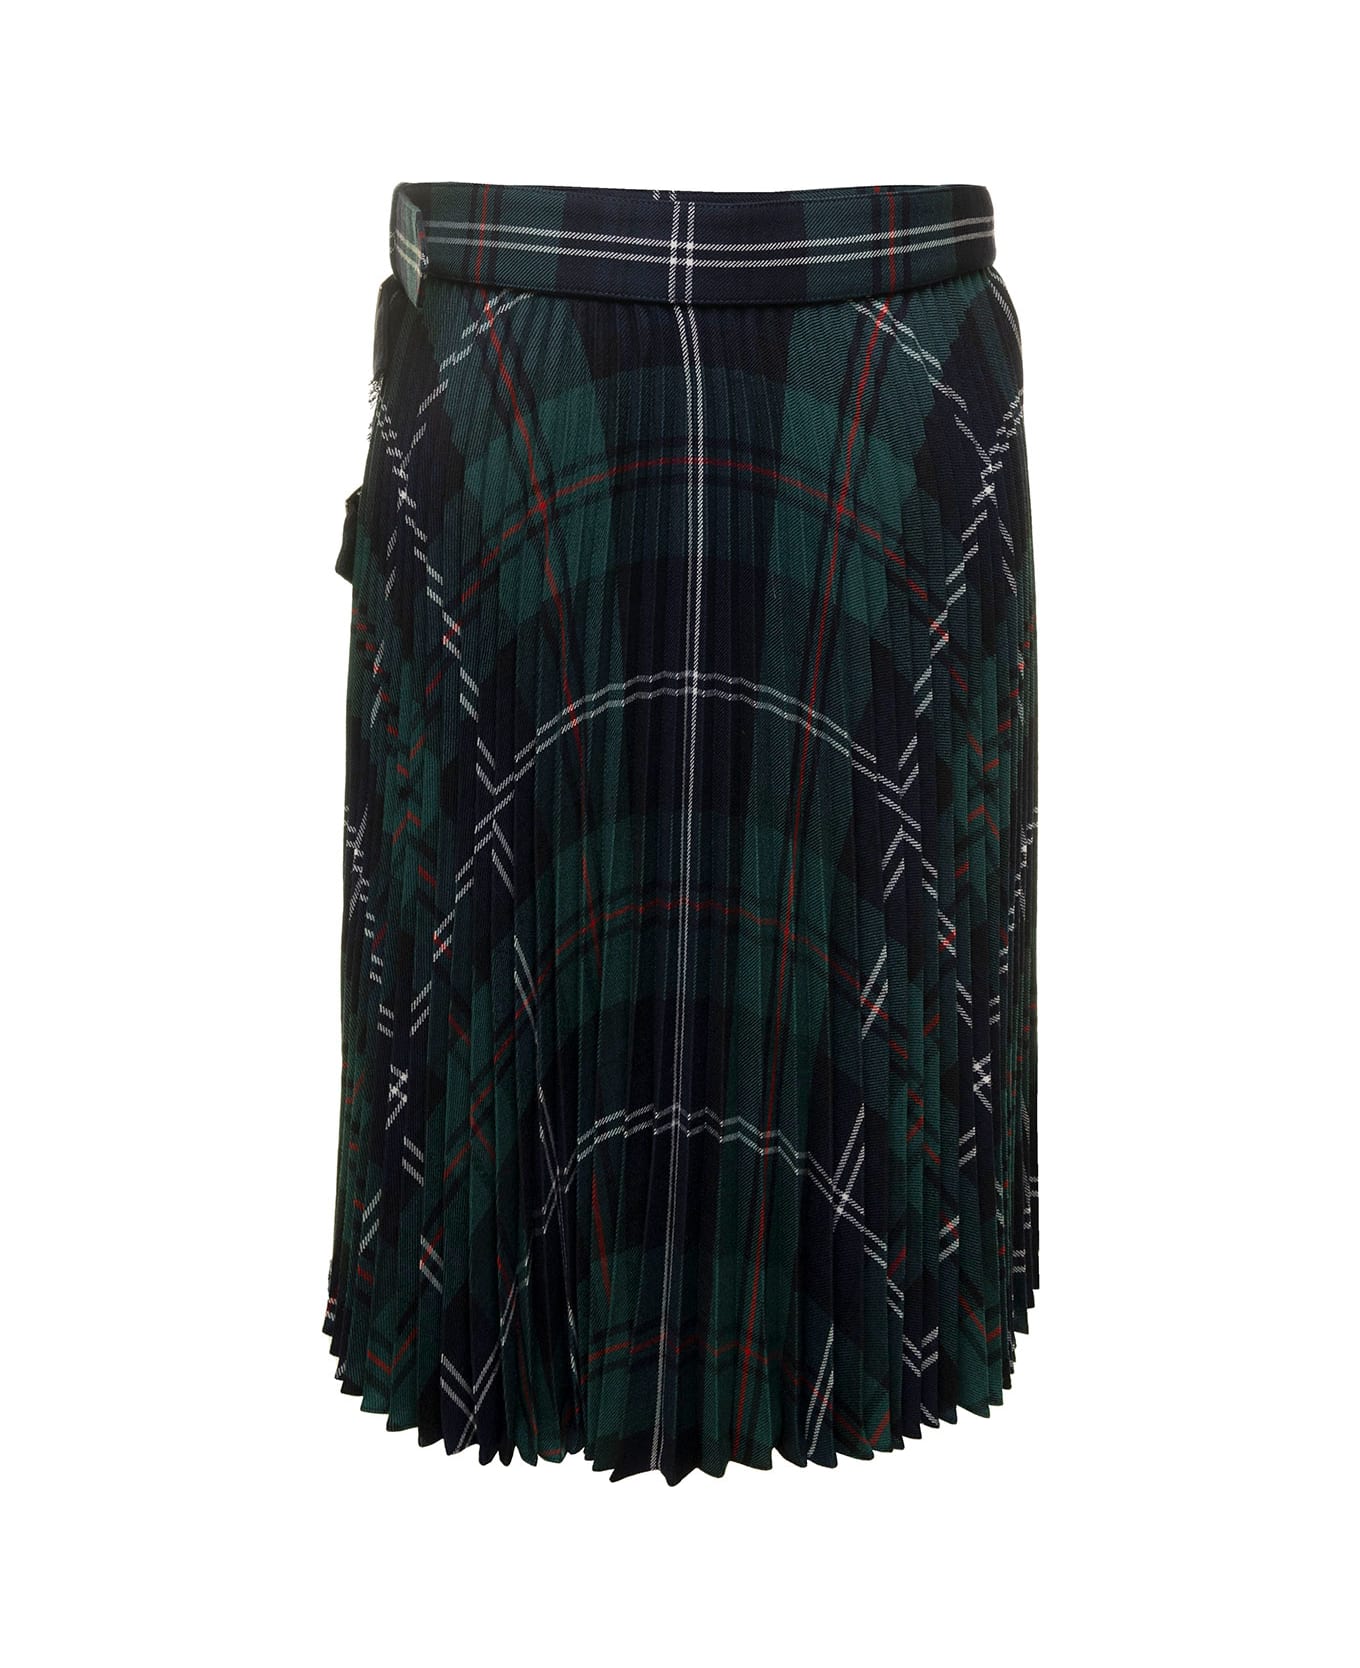 Burberry Midi Wrap Skirt With Check Motif Brown Wool Woman Burberry - Green